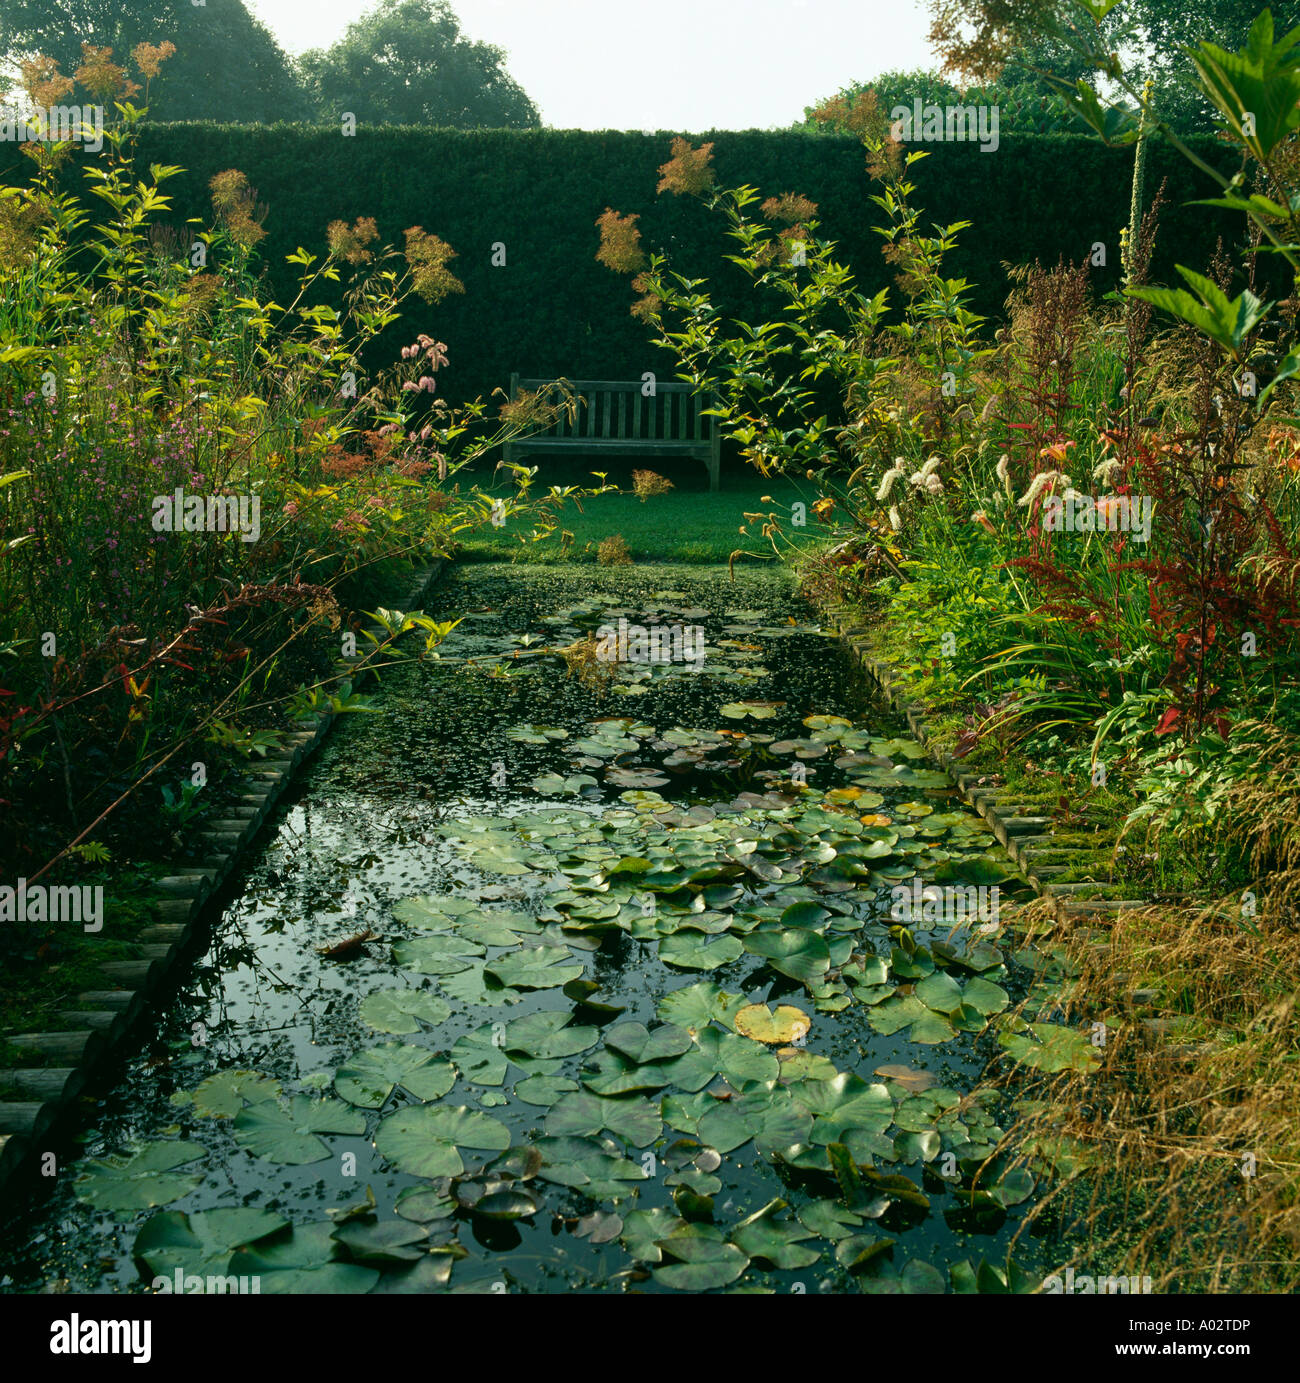 Narrow formal rectangular pond with waterlilies between perennial beds with autumn seedheads Stock Photo